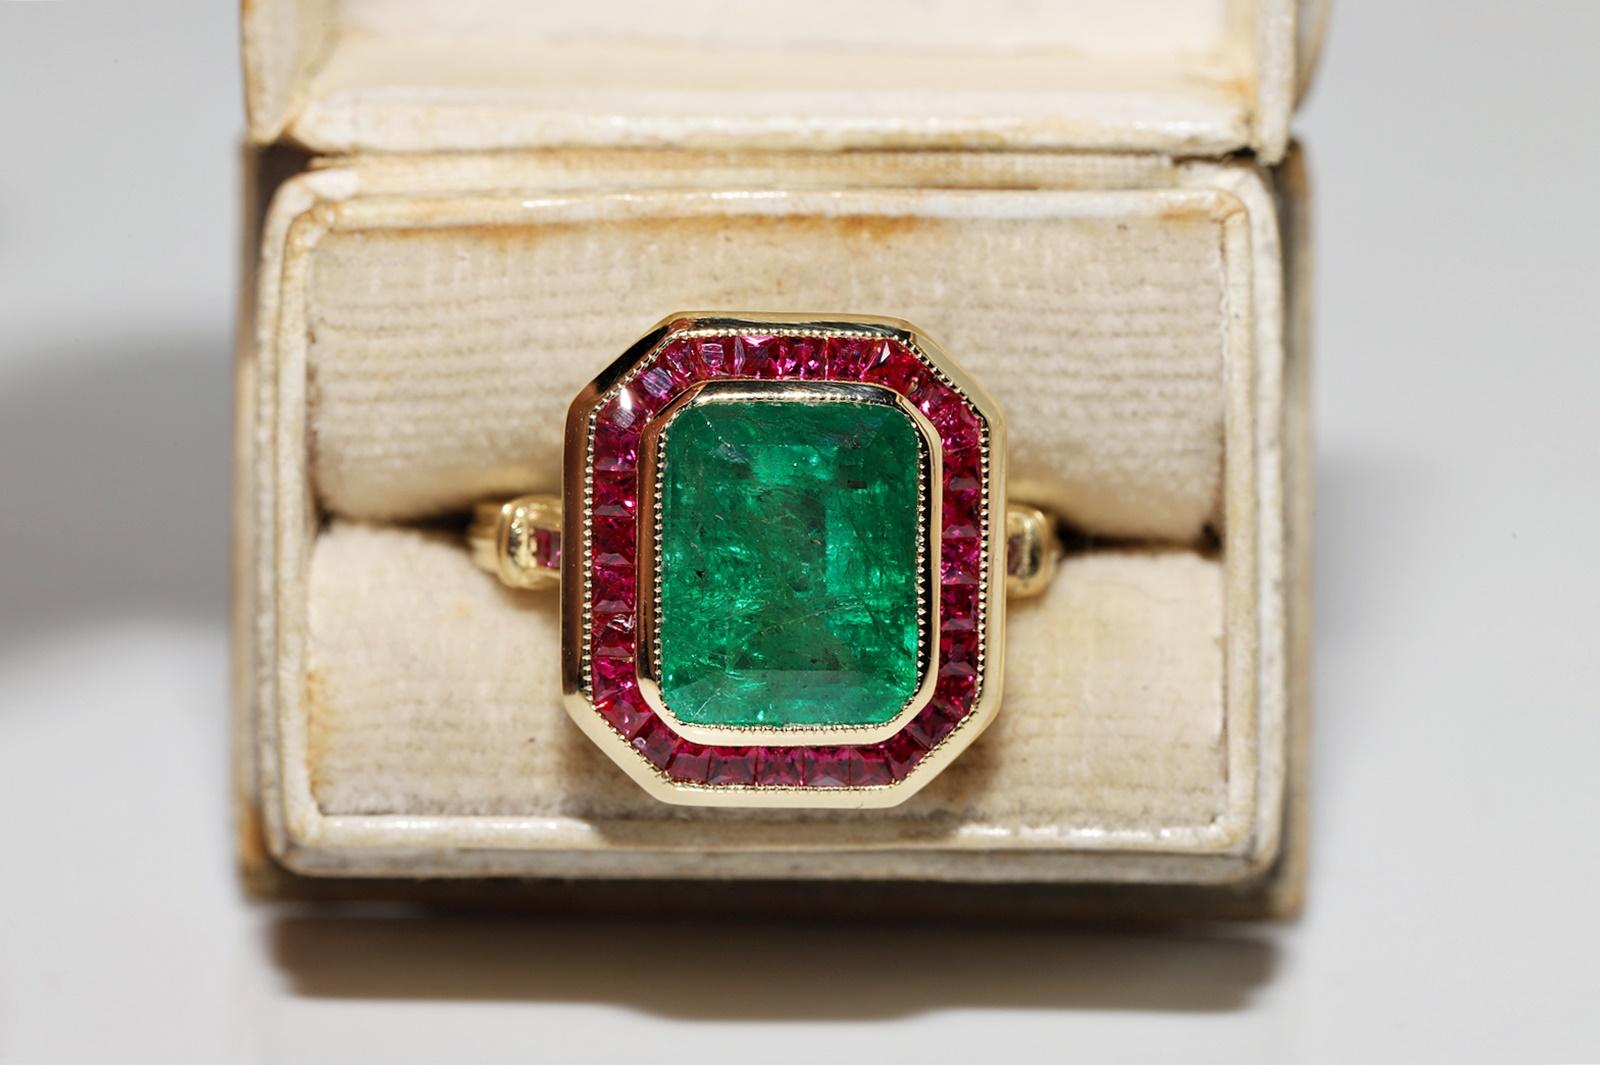 In very good condition.
Total weight is 8.1 grams.
Totally is emerald 5.18 ct.
Totally ruby 1.30 ct.
Ring size is US 6.5 (We can make any size)
Box is not included.
Please contact for any questions.